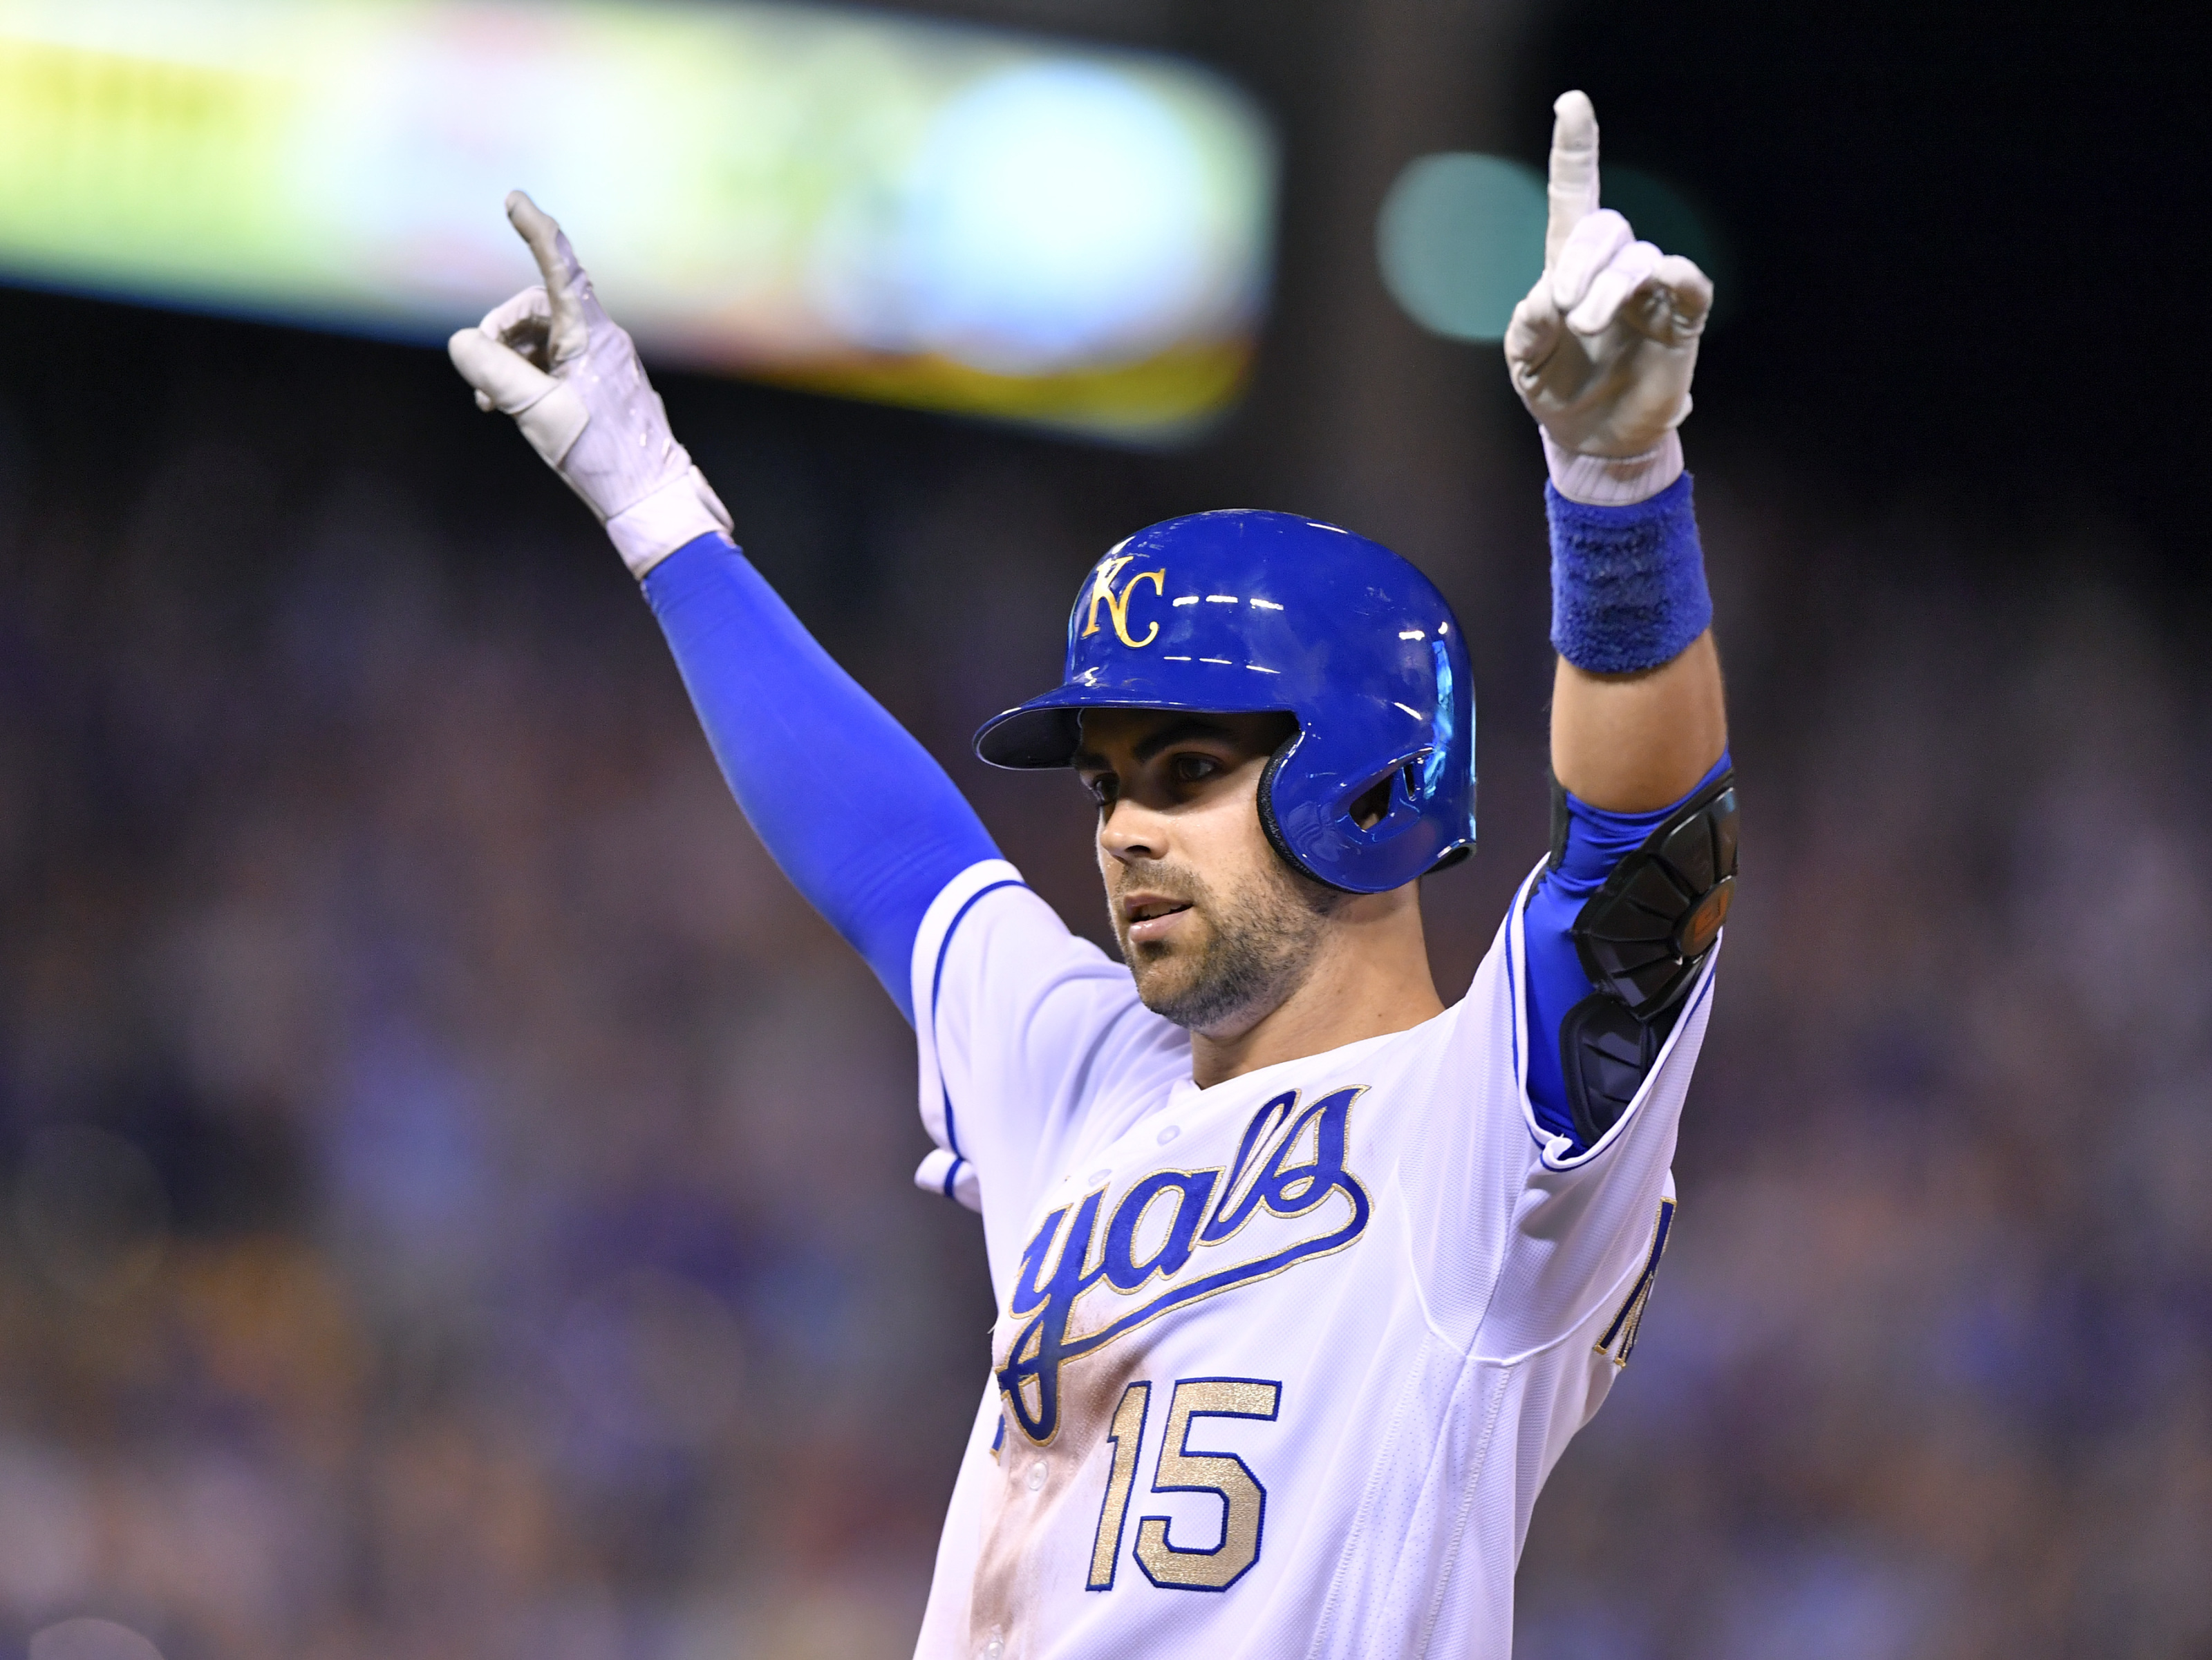 Whit Merrifield would like to be with Royals when they start winning